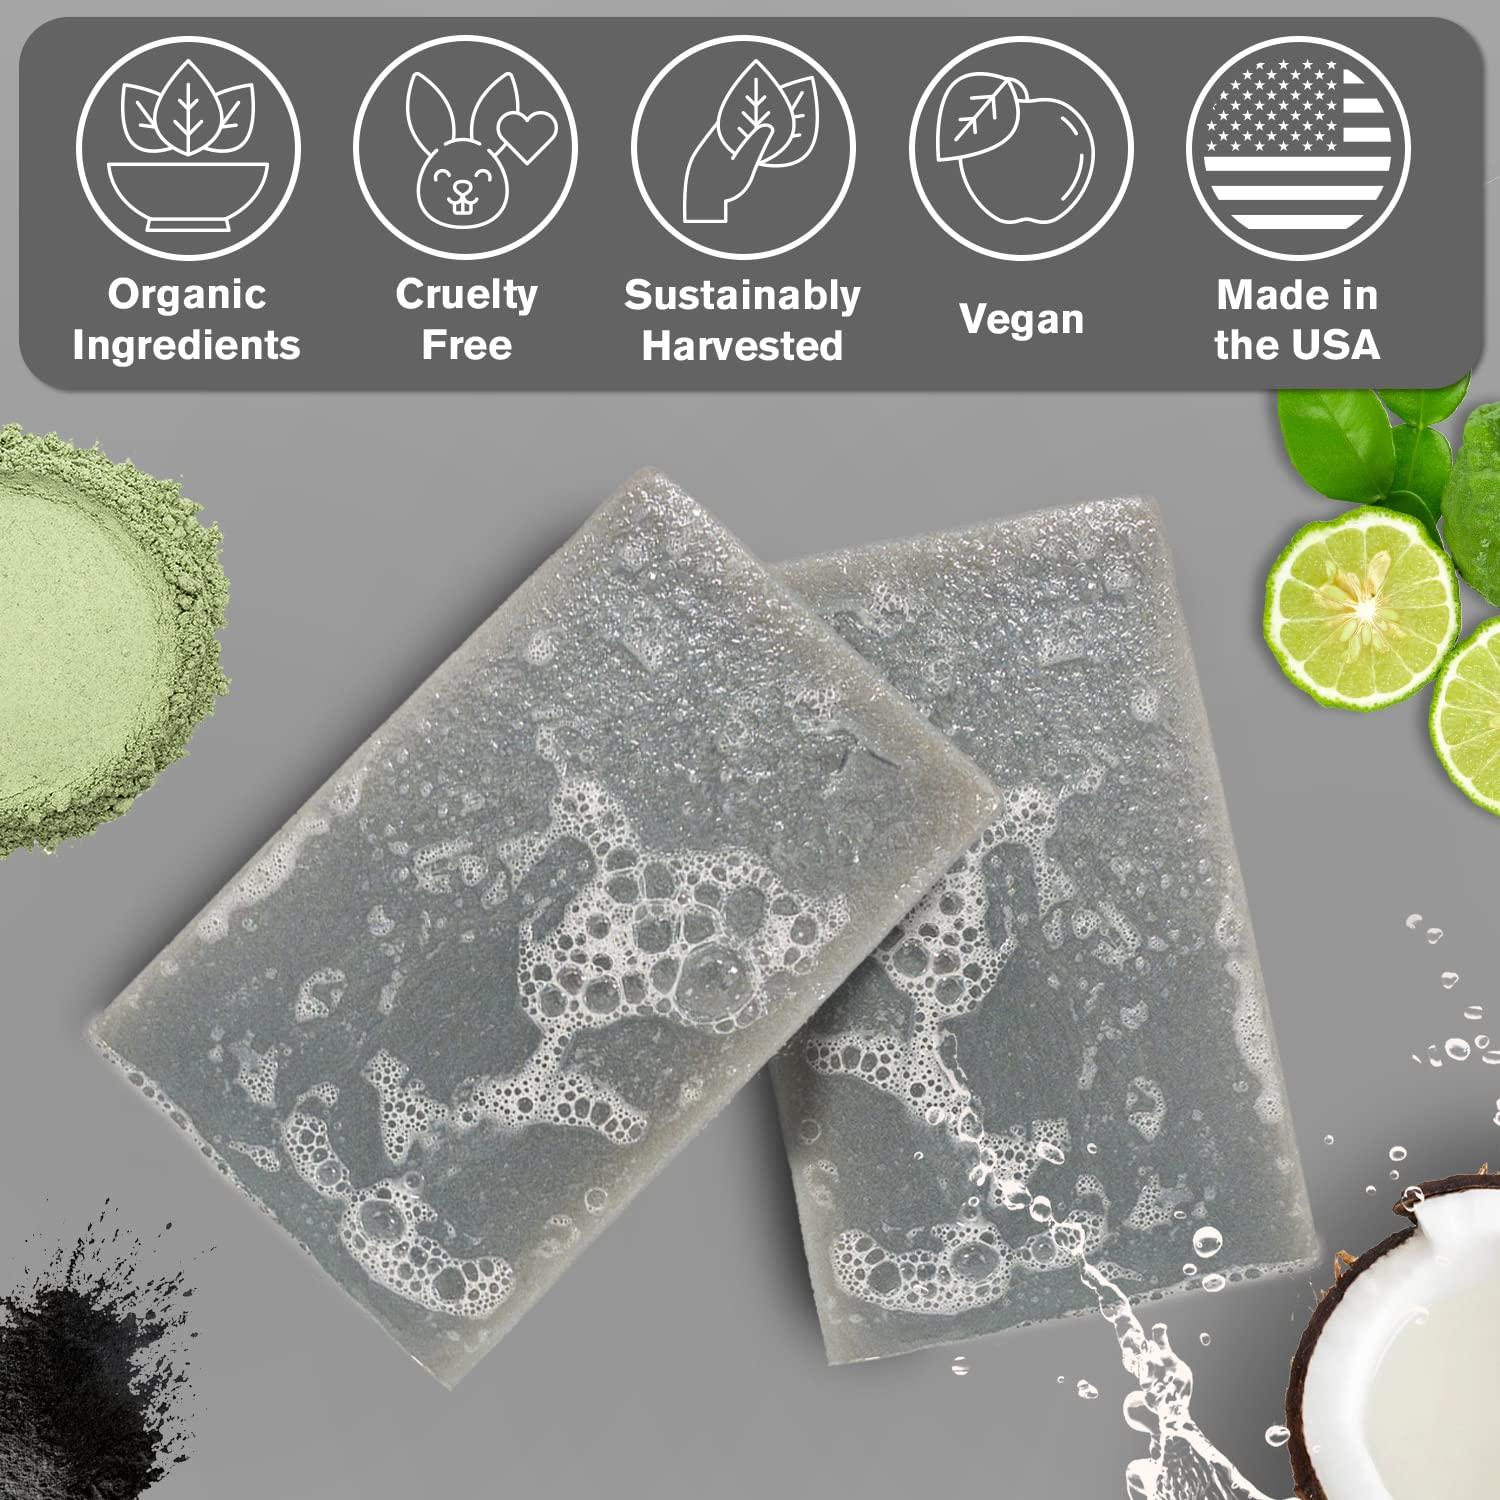 Ness Mens Soap Bar - Pine Tar Scent Natural Soap For Men With Organic  Ingredients Mens Bar Soap With Essential Oils Moisturizing Bar Soap For Men  Handmade In The USA Cruelty Free